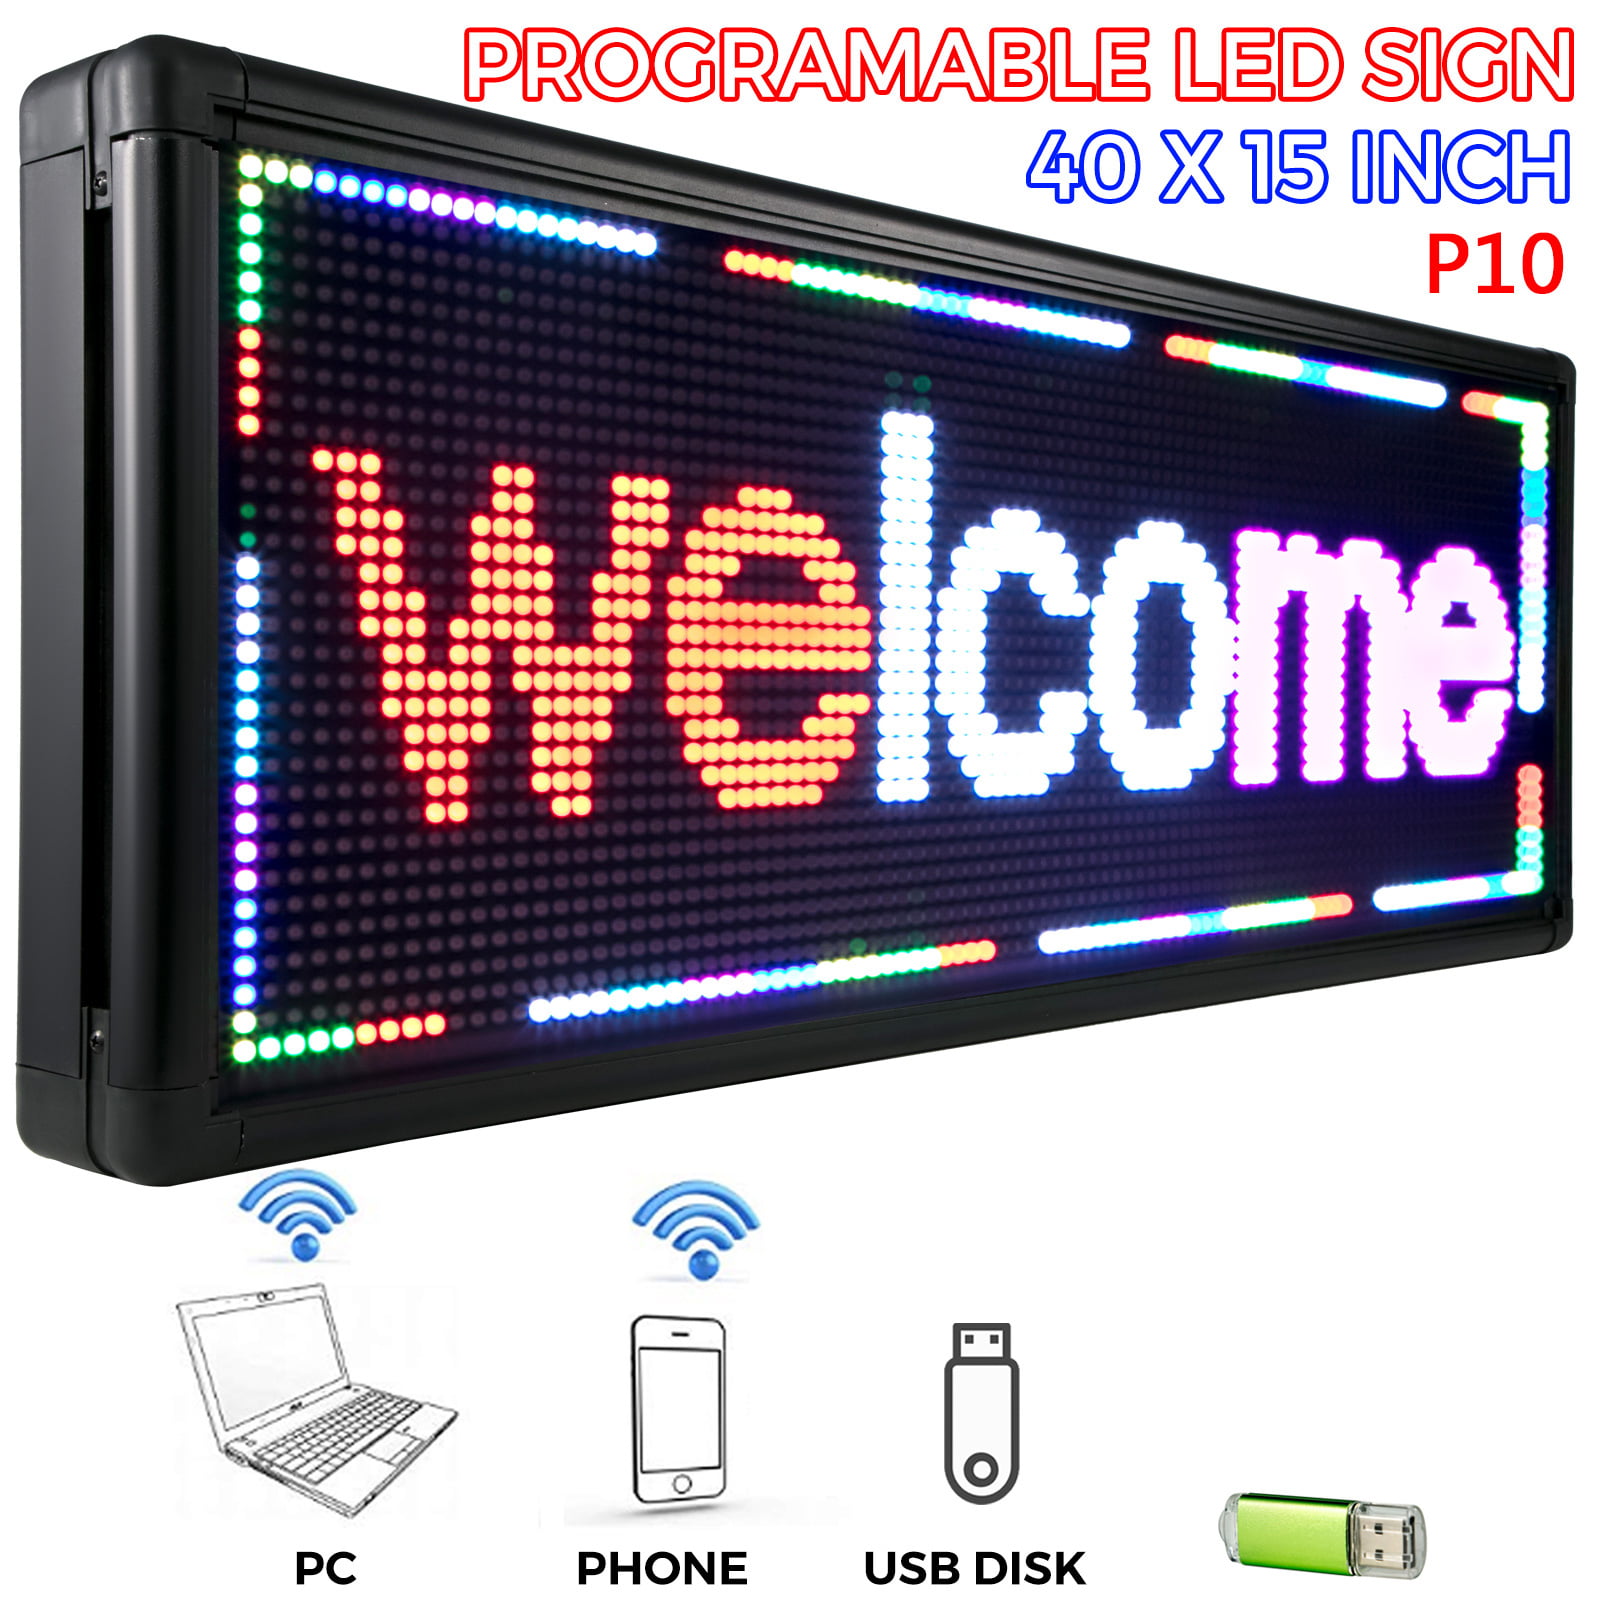 Super Bright Electric Advertising Display Board LED Open Sign for Plumbing Supply Store Business Shop Store Window Home Decor 3 LED Water Pipes Sign 